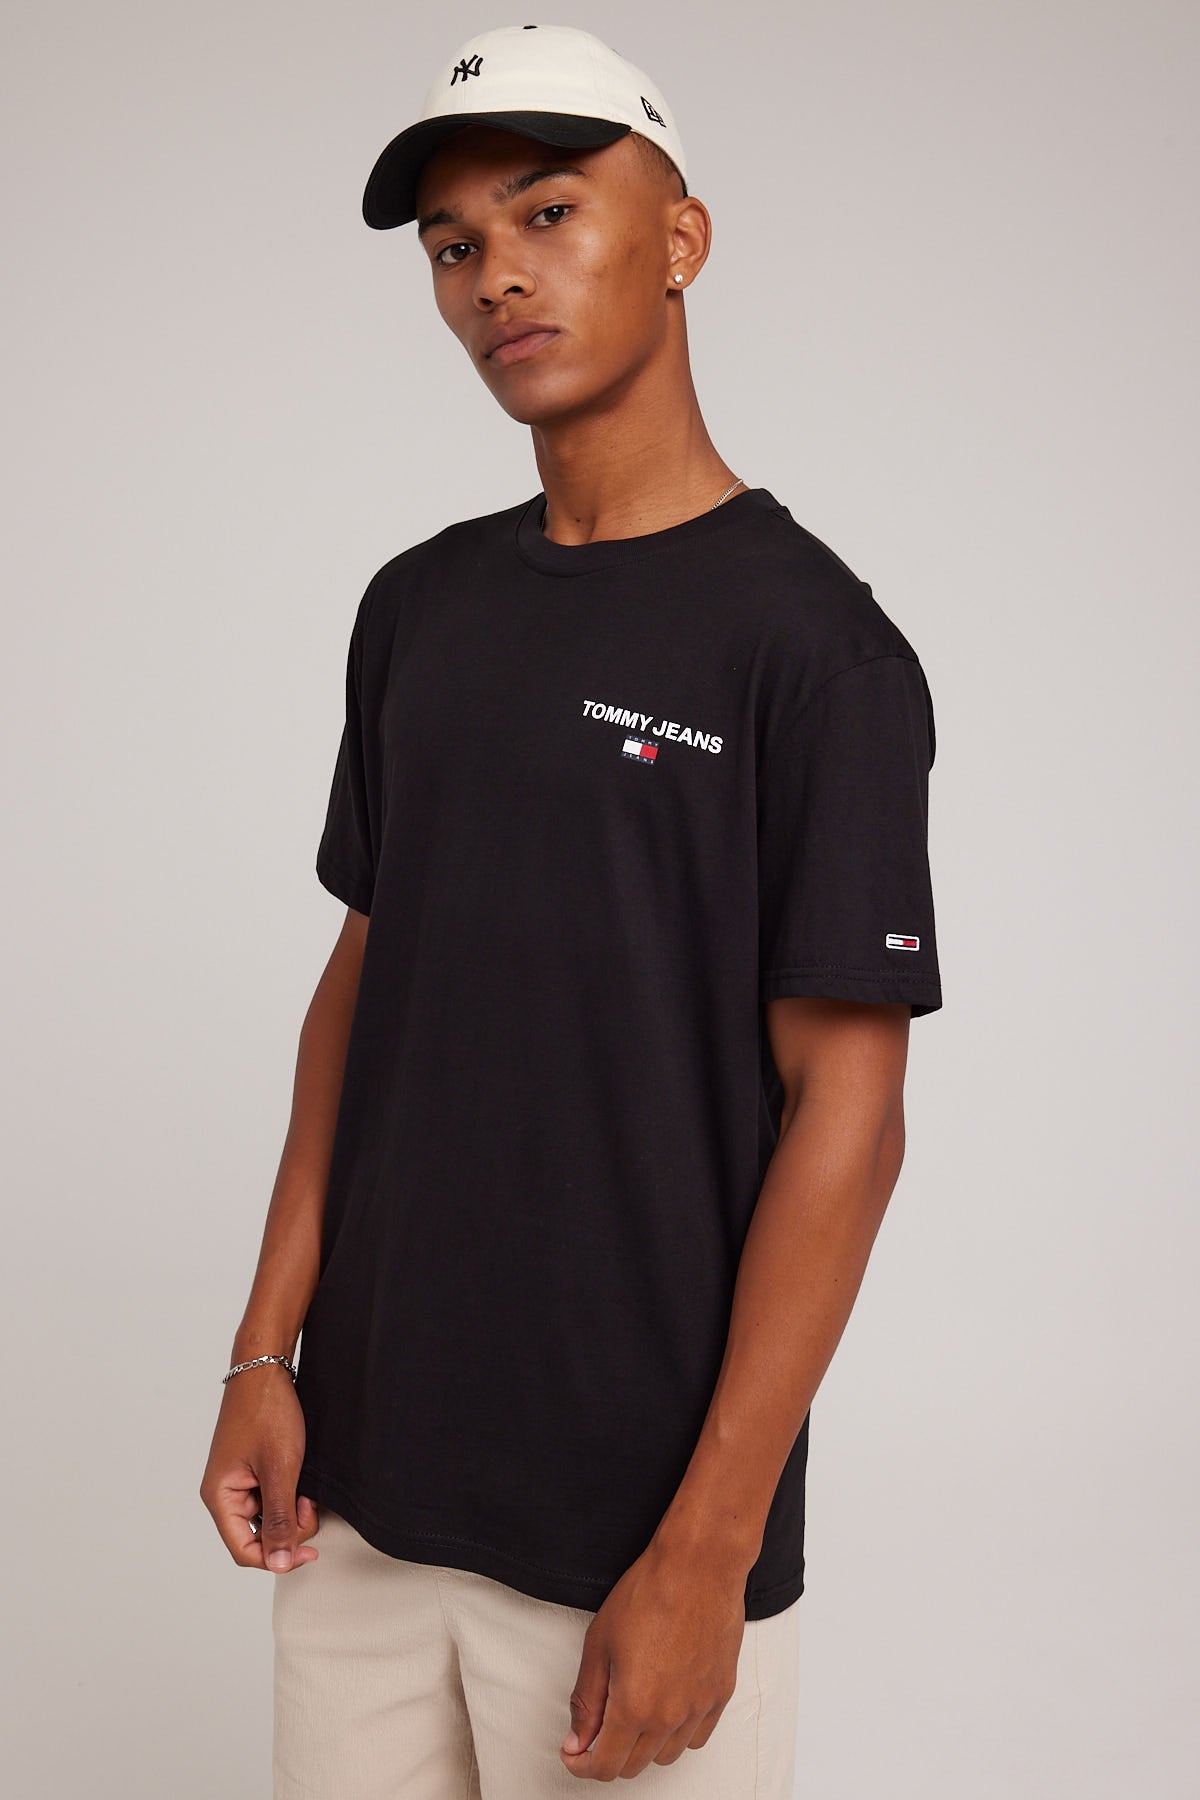 Tommy Jeans TJM Classic Linear Back Print Tee Black – Universal Store